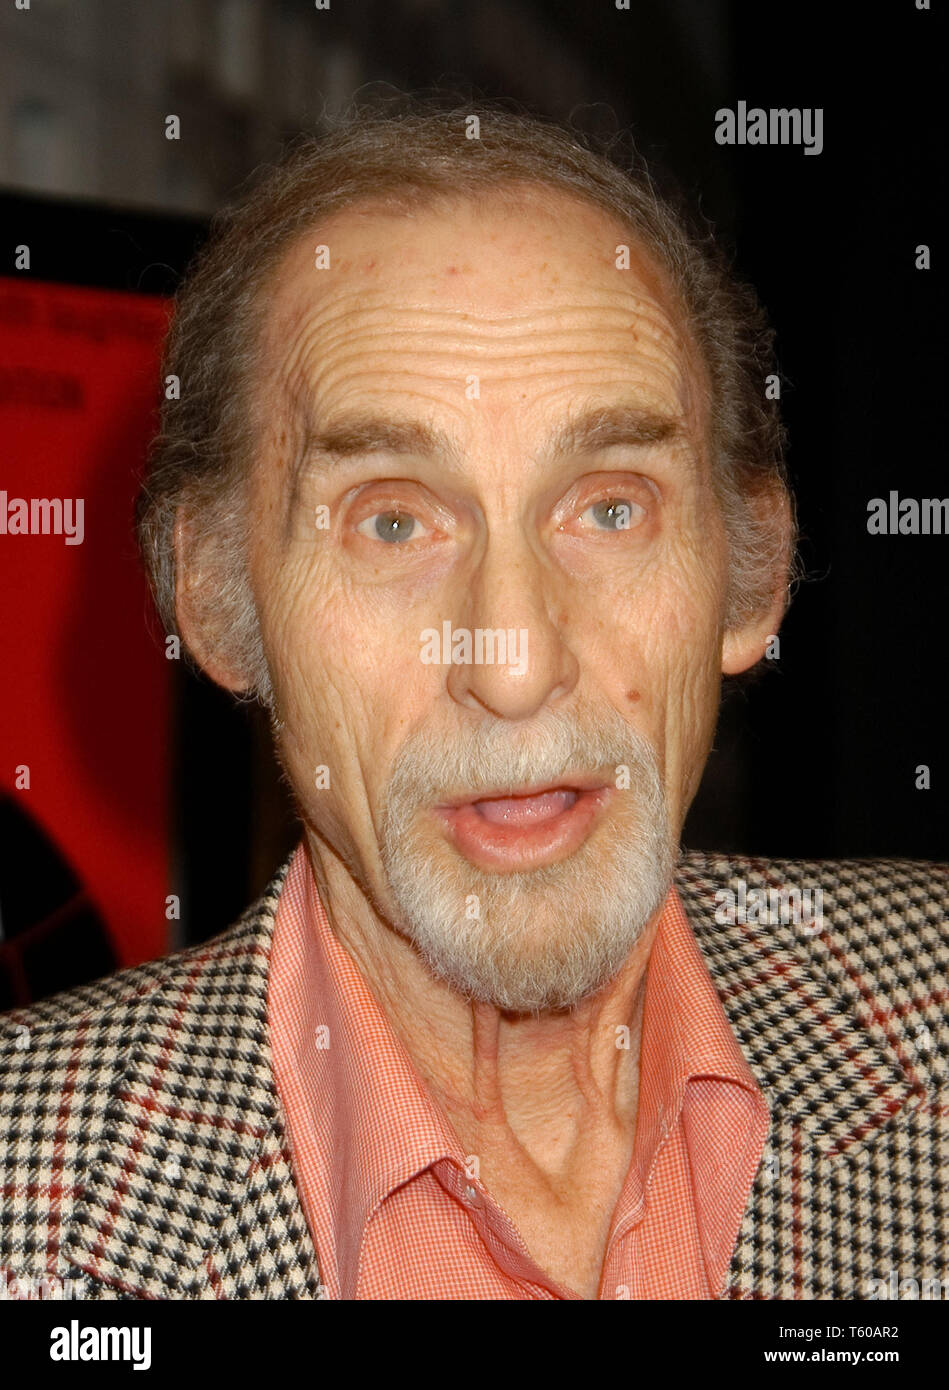 Sid Caesar at the 40th Anniversary of Stanley Kramer's 'It's A Mad, Mad, Mad Mad World' and 40th Anniversary of Arclight Hollywood's Cinerama Dome  at the Arclight Hollywoods Cinerama Dome Theater in Hollywood, CA. The event took place on Thursday, October 16, 2003. Photo by: SBM / PictureLux  File Reference # 33790 1077SBMPLX Stock Photo